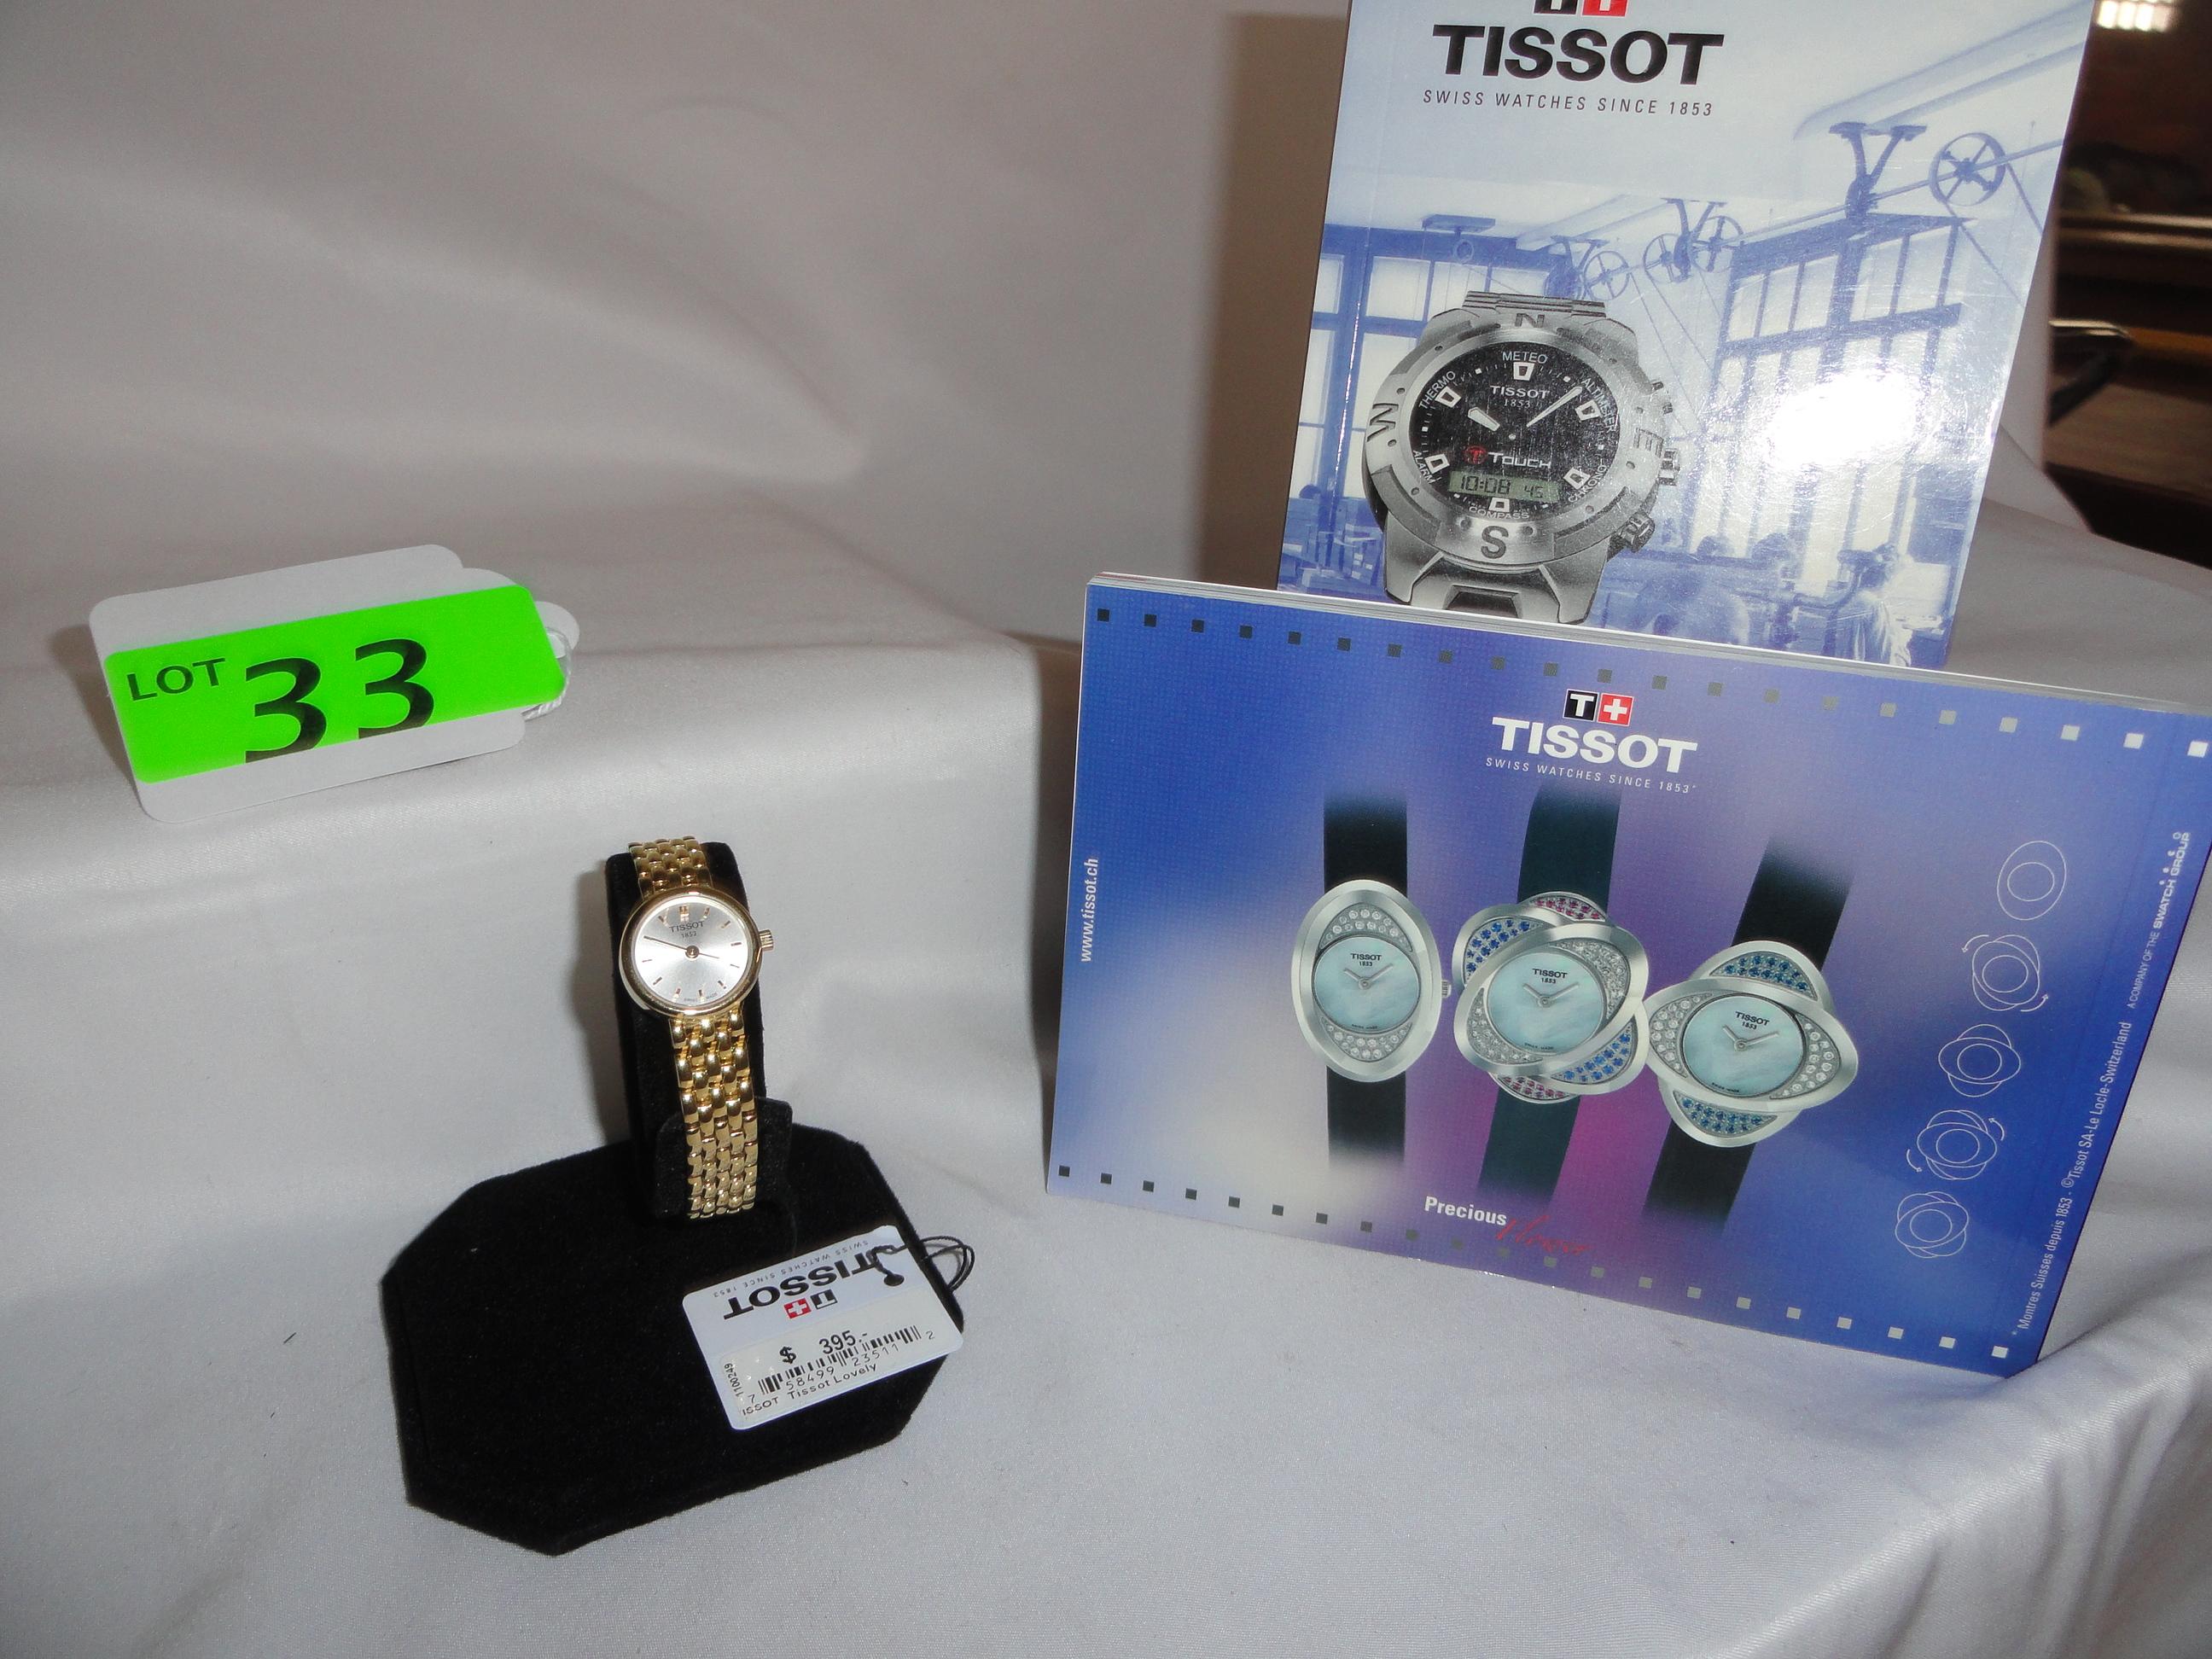 LADIES' TISSOT GOLD TONE WATCH, NEW WITH PAPERS